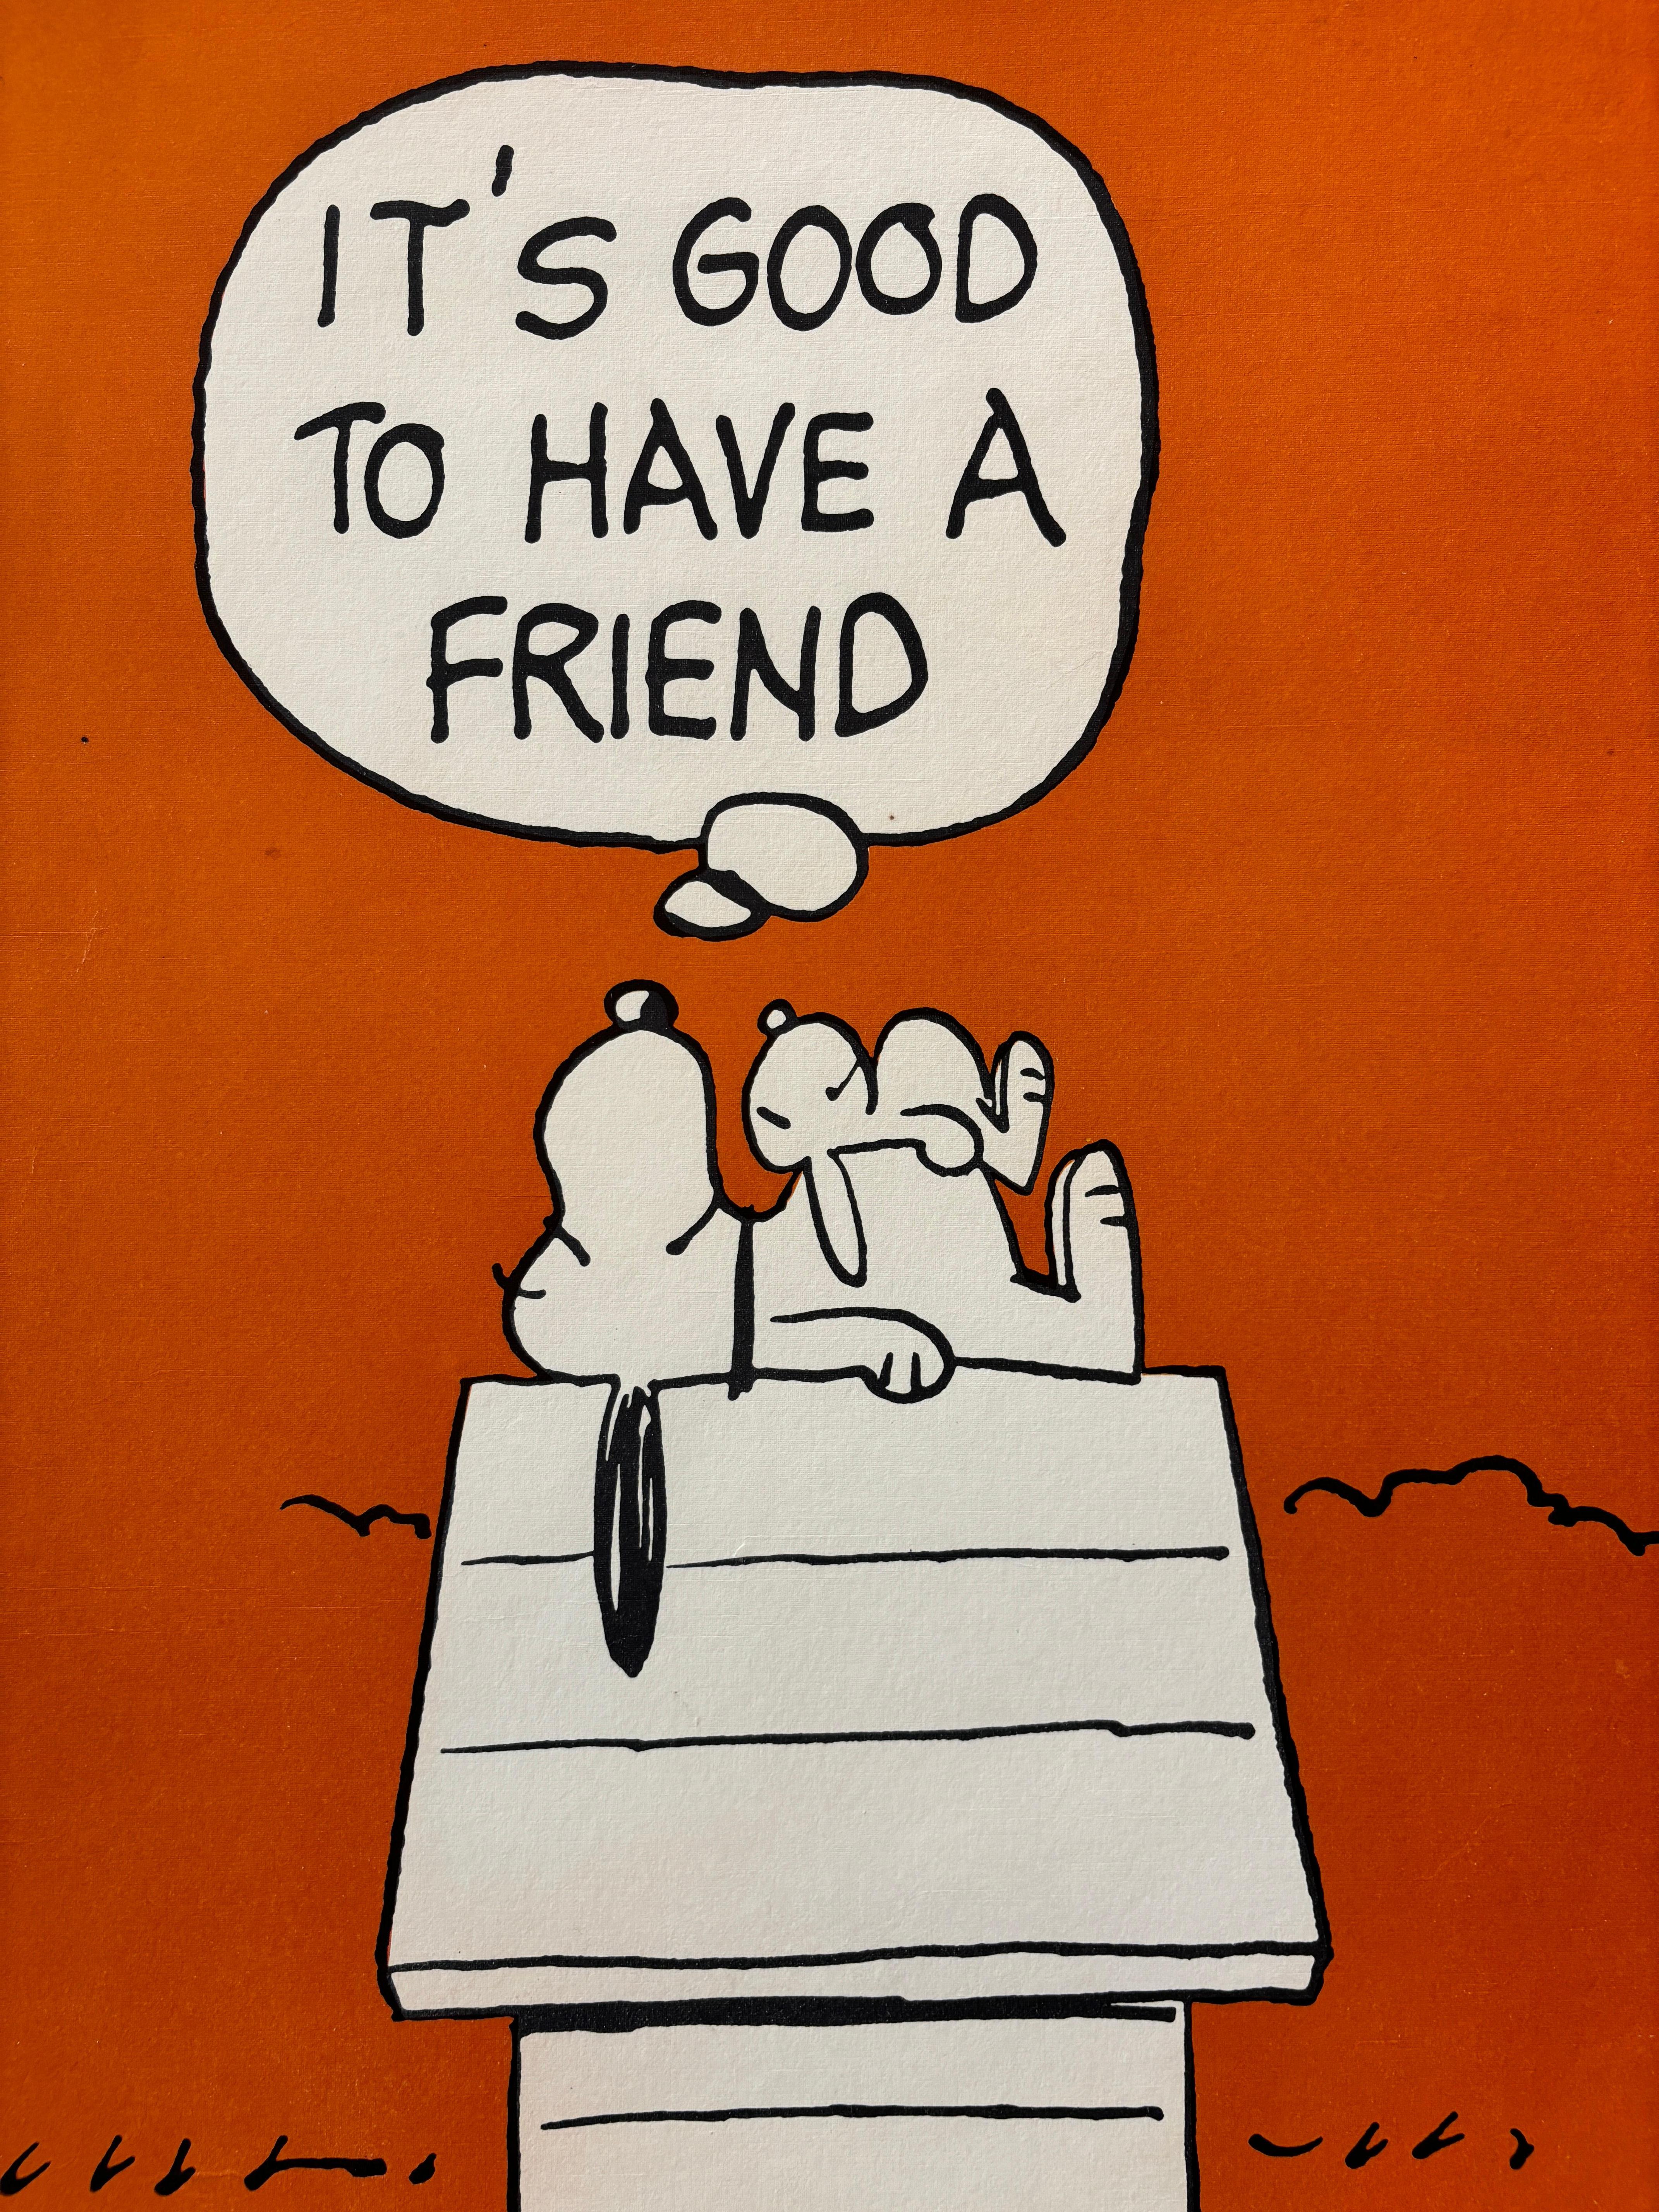 This is an original vintage poster from 1958 featuring SNOOPY by Schulz. This poster is in excellent condition and has been linen backed for preservation.

CONDITION	
Good

FORMAT	
Linen backed

DIMENSIONS	
50x62cm

ARTIST	
Schultz

YEAR	
1958

